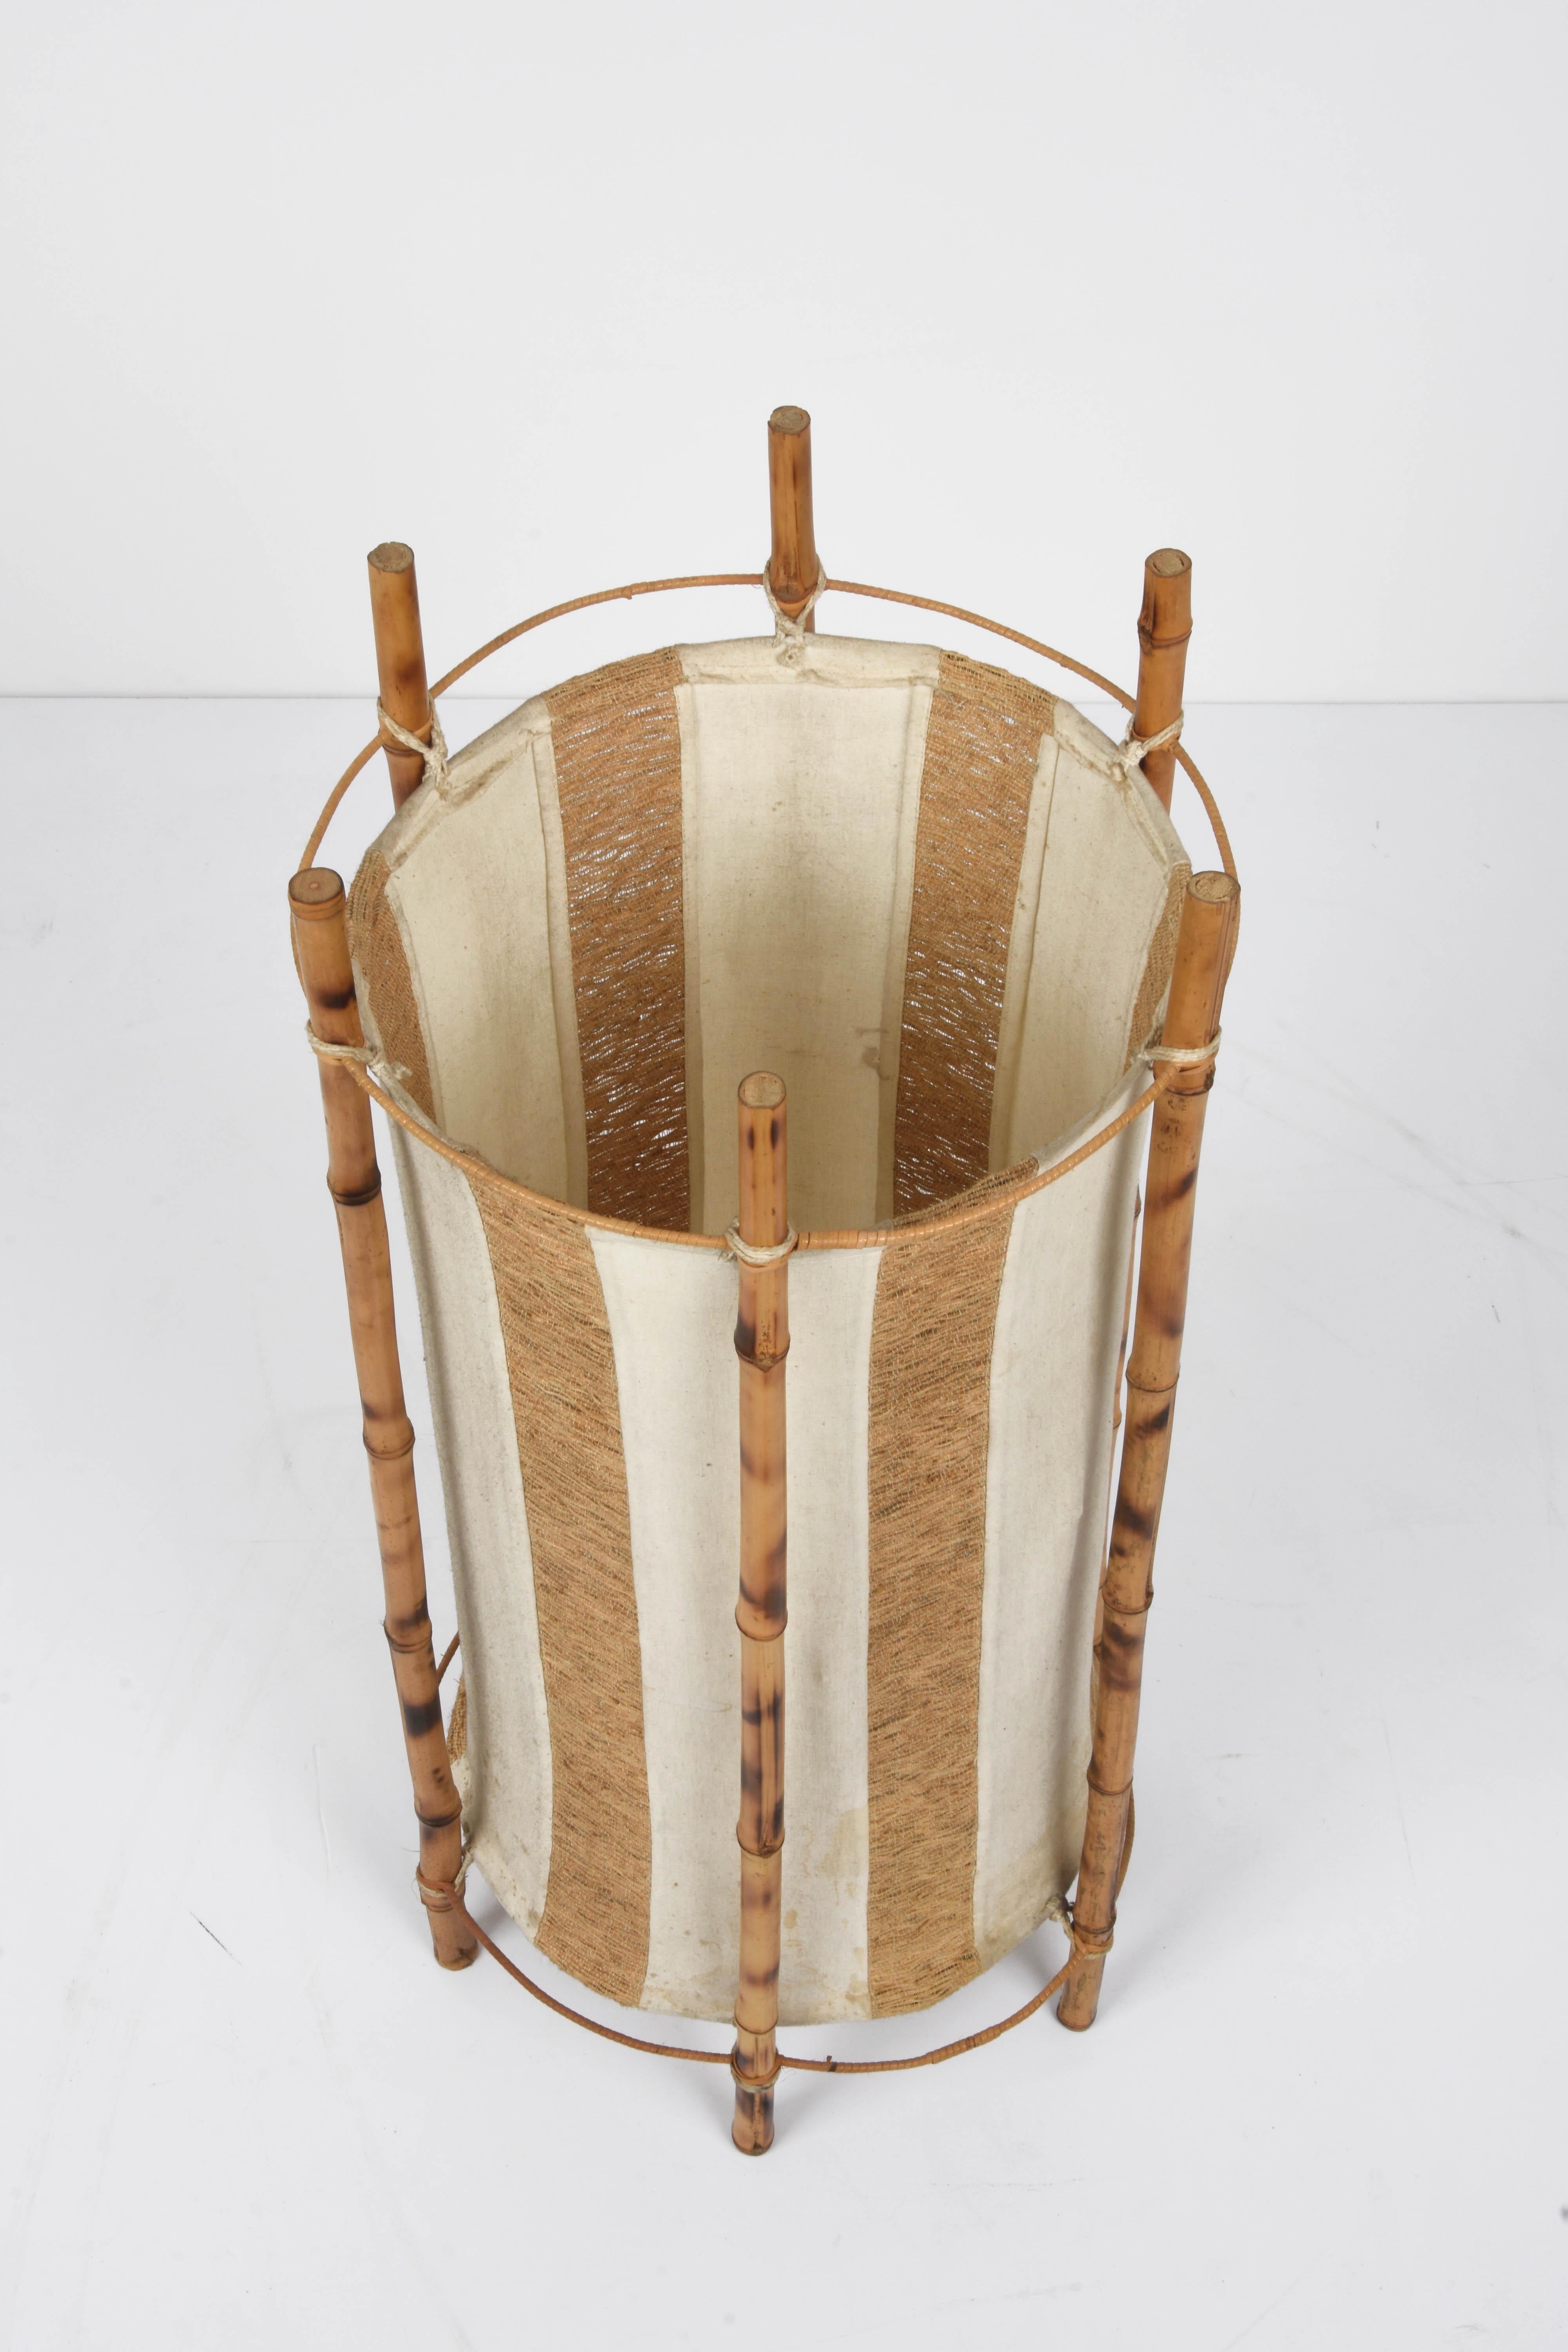 Louis Sognot Midcentury Cotton, Bamboo and Rattan Italian Floor Lamp, 1950s For Sale 6